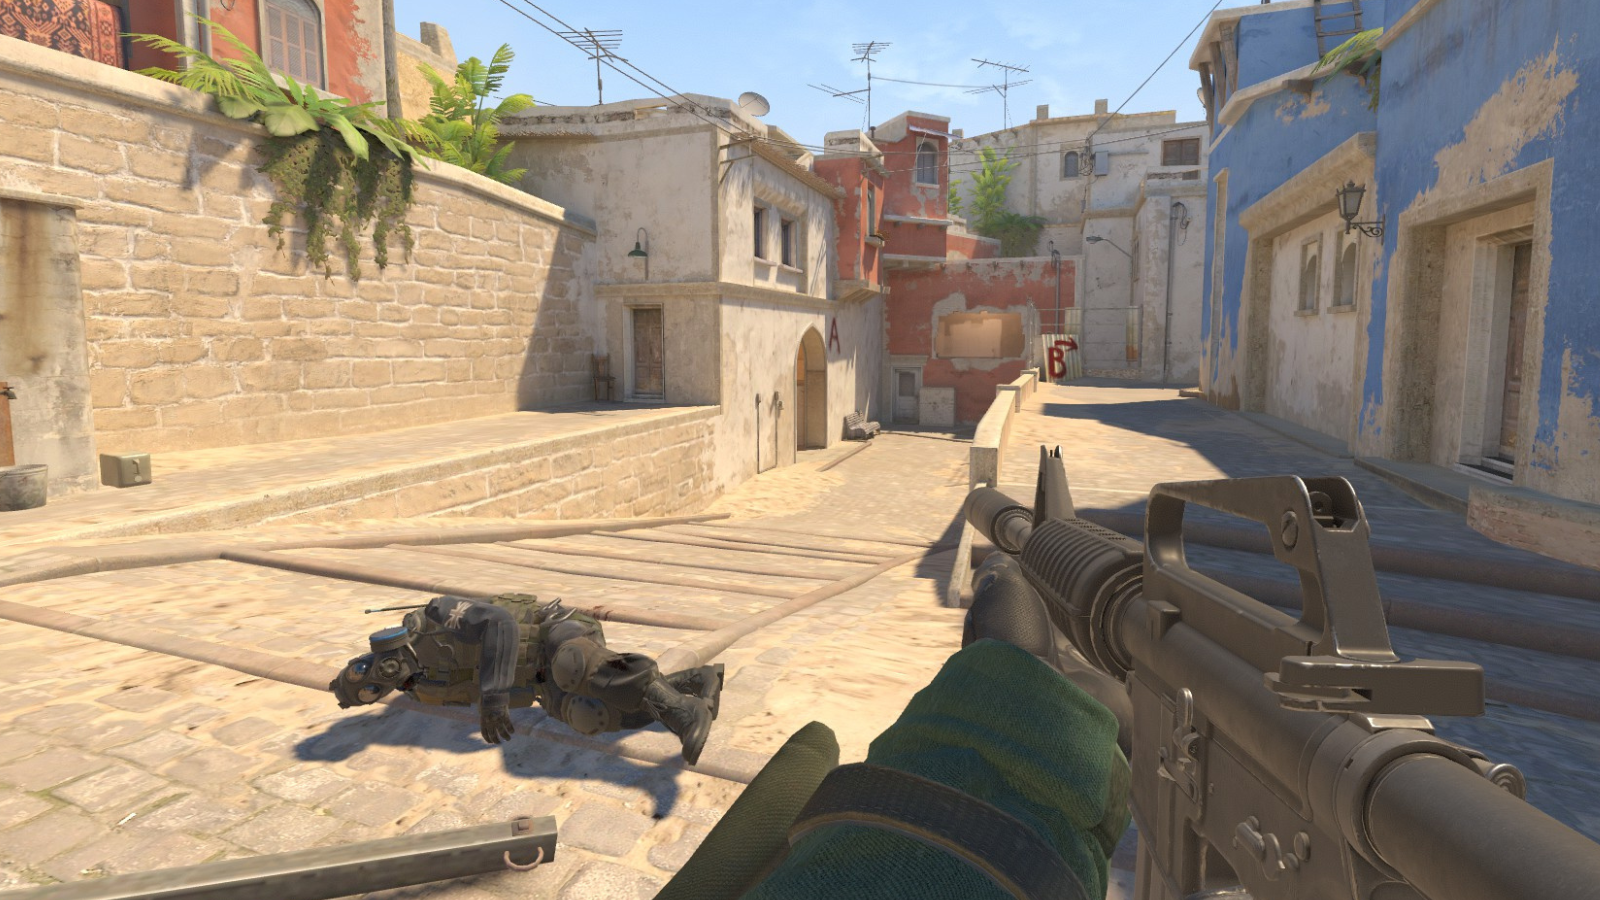 Counter-Strike 2 has officially launched, while Counter-Strike